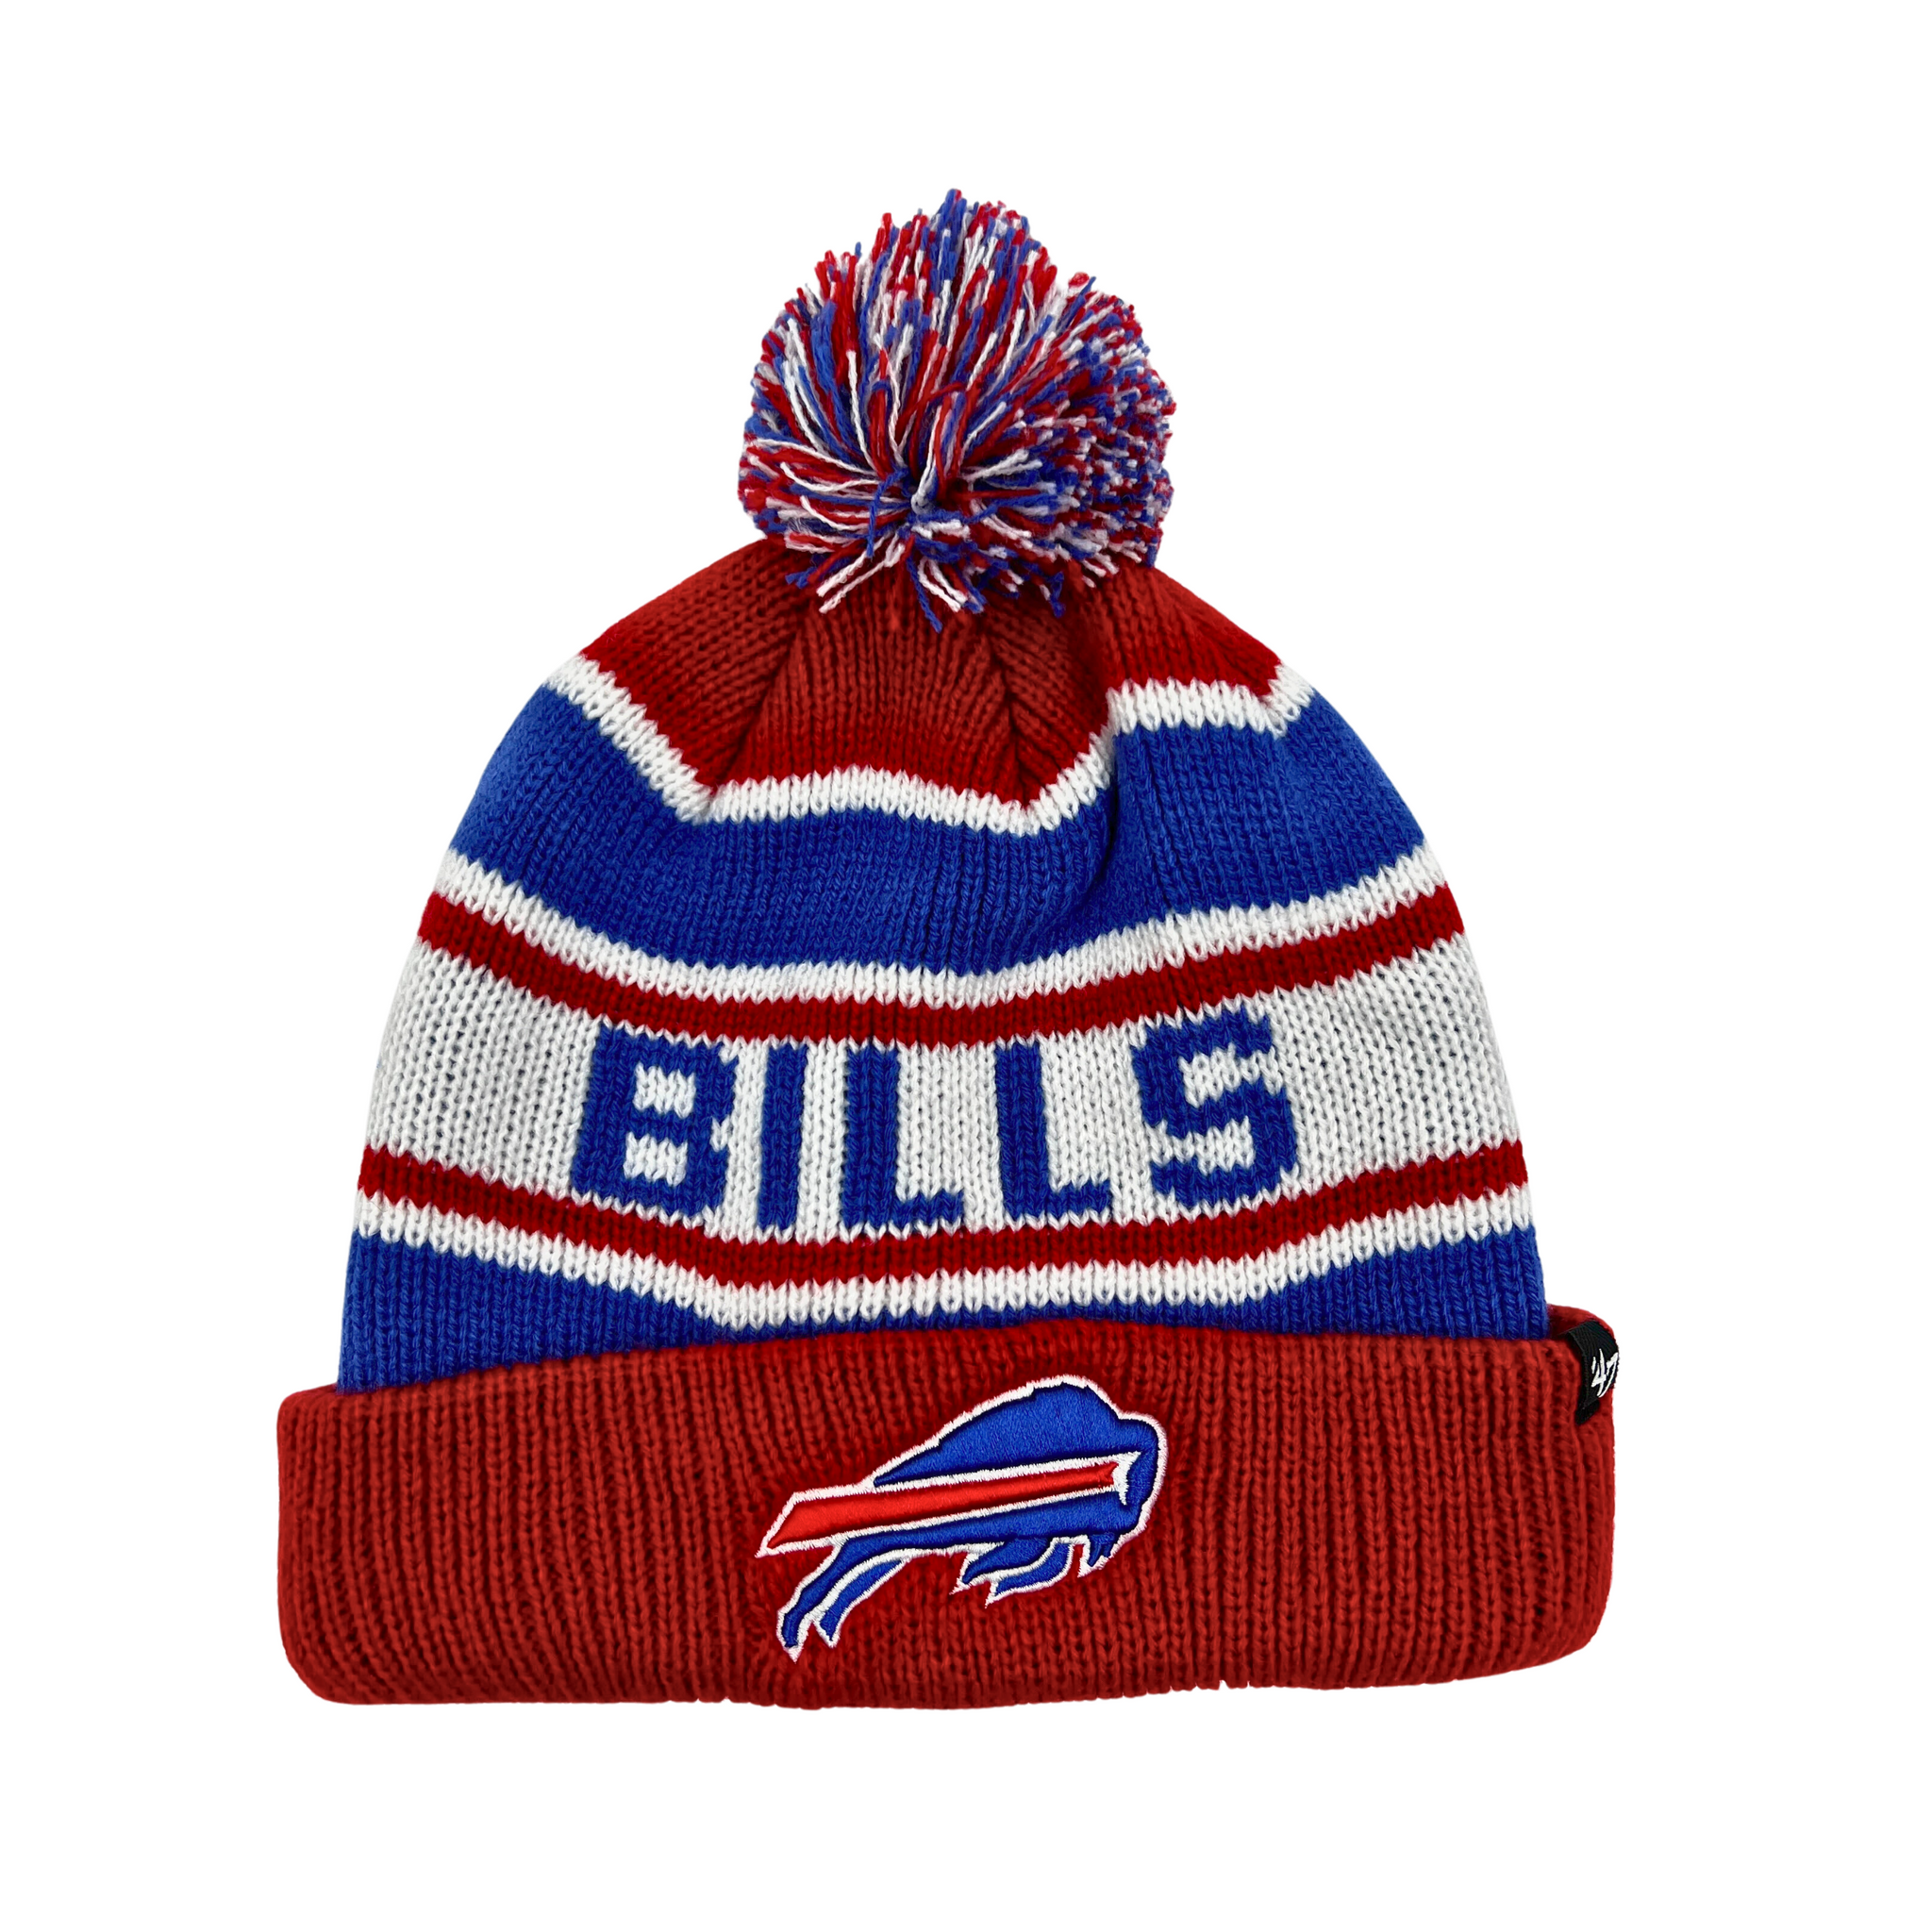 Youth Buffalo Bills Embroidered Team Logos Winter Hat